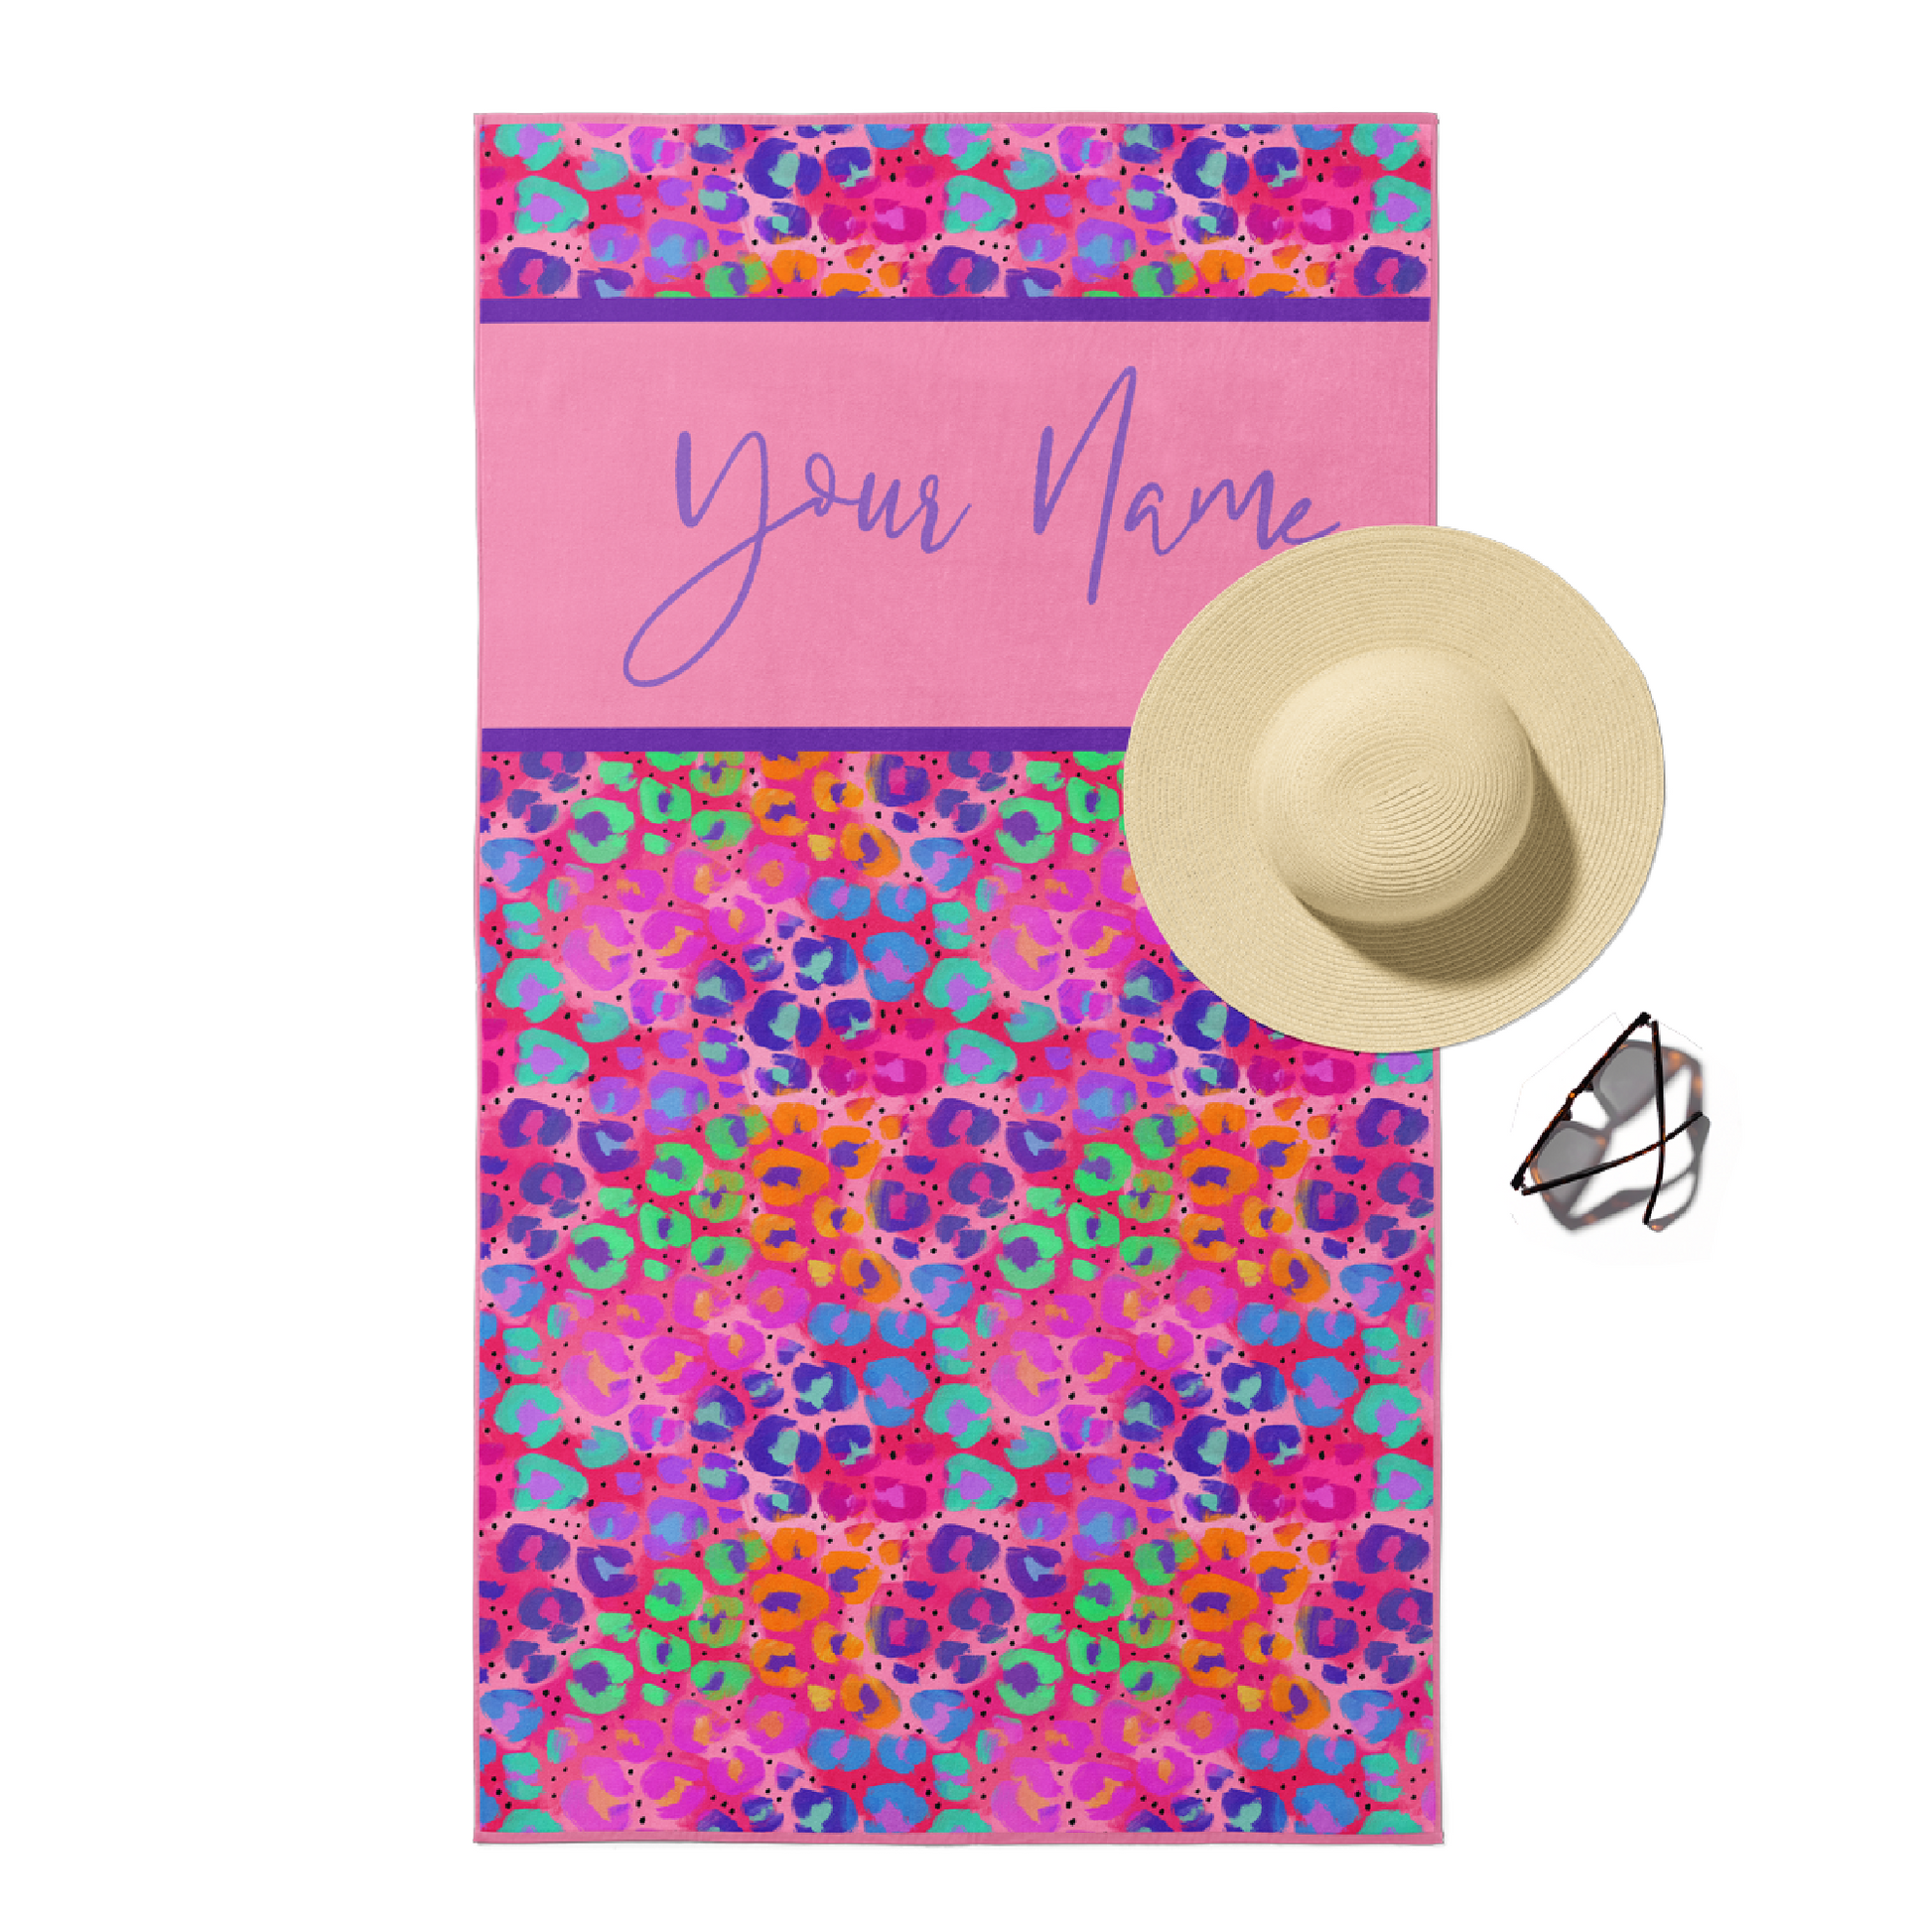 Beach towel in hot pink with bright rainbow leopard animal print and customizable purple text.